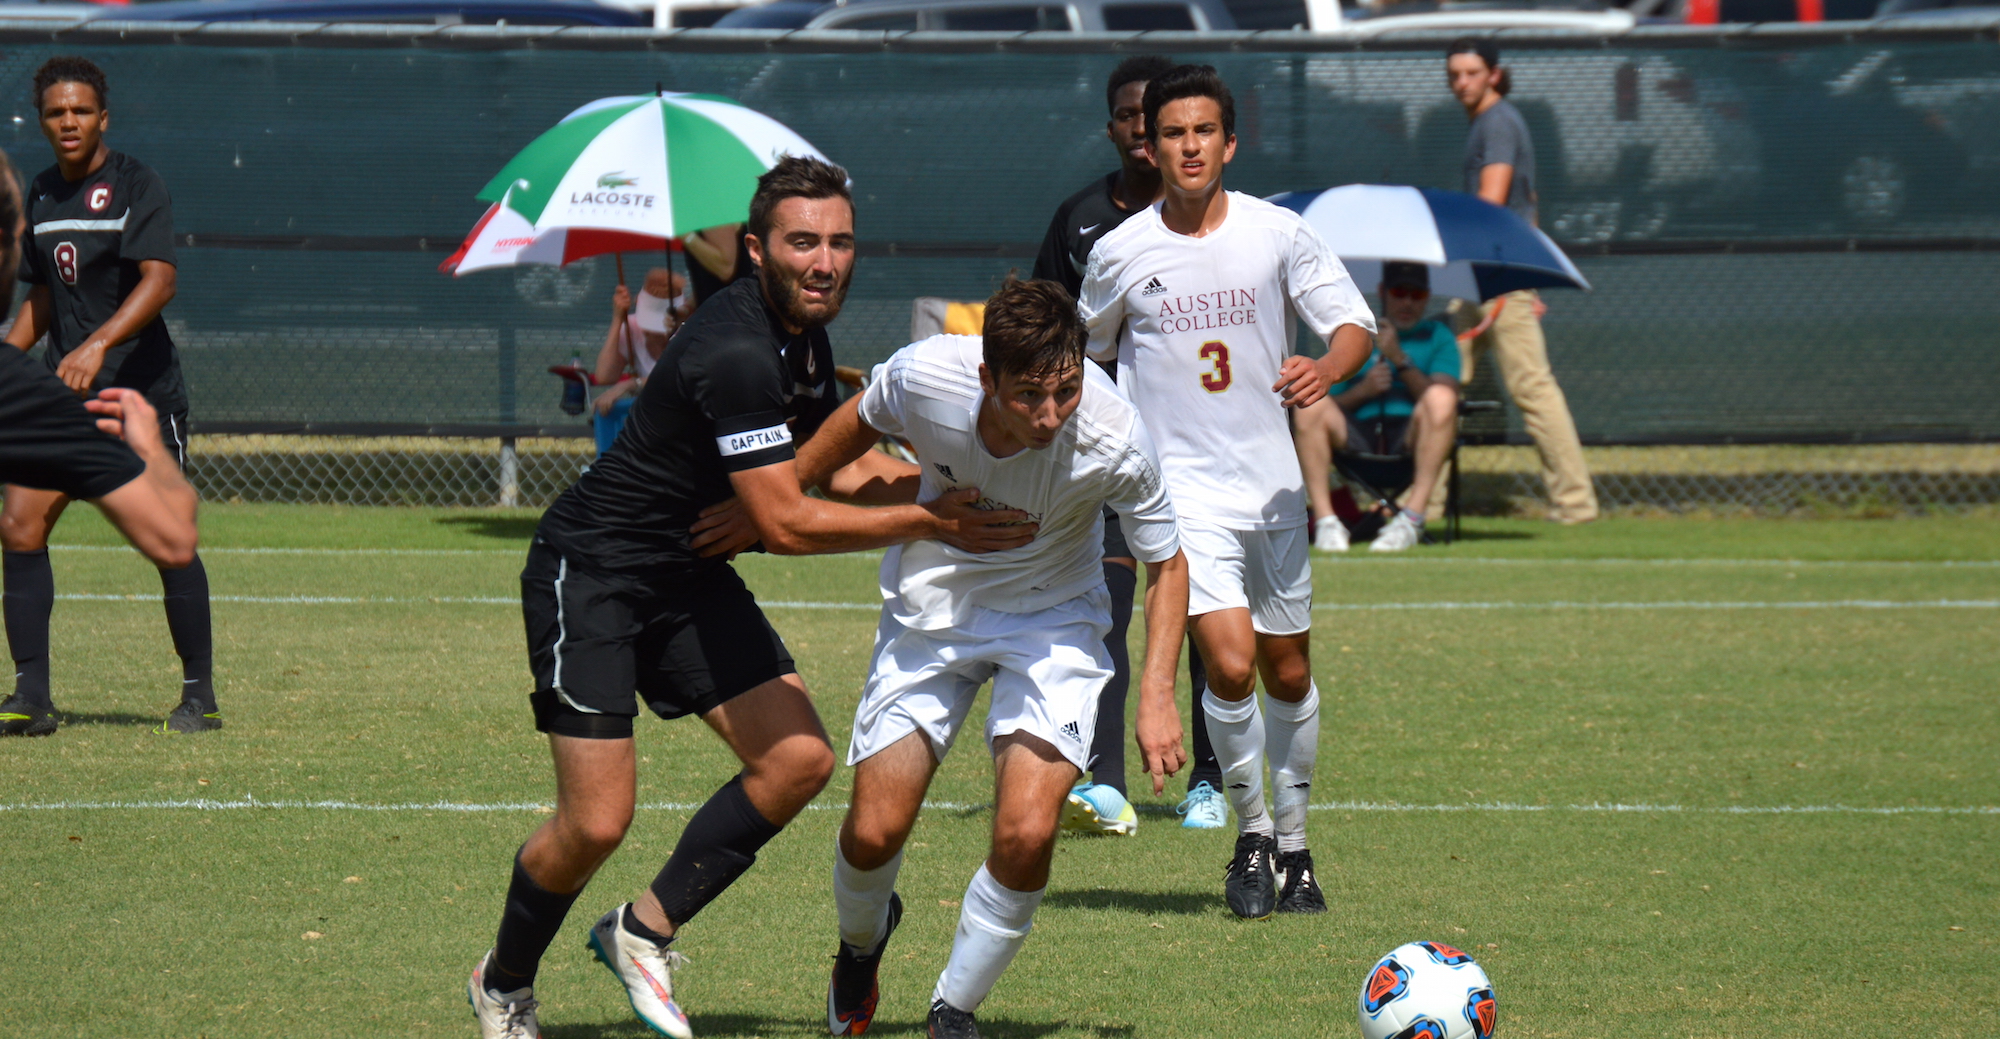 Quick Named SCAC Offensive Player of the Week